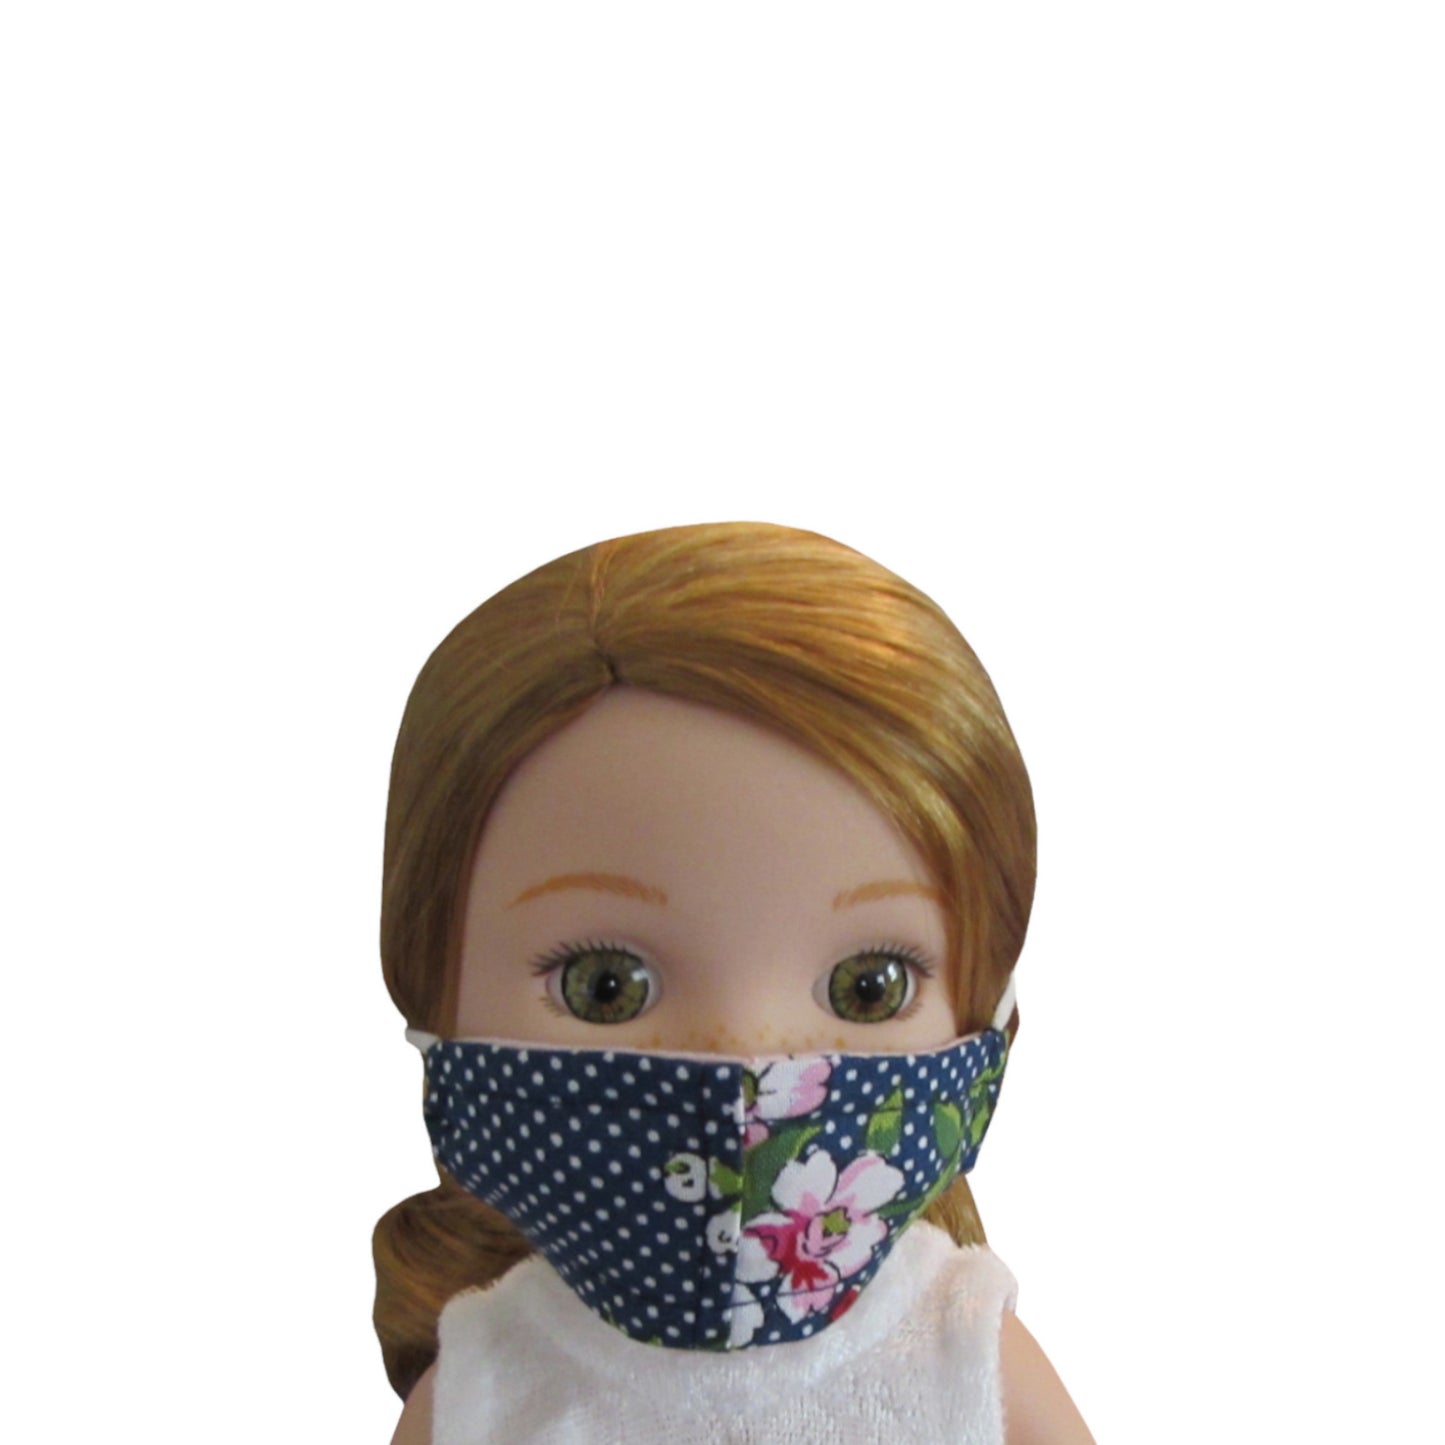 Pink Floral and Dots on Navy Print Doll Face Mask for 14 1/2-inch dolls with Wellie Wishers doll Front